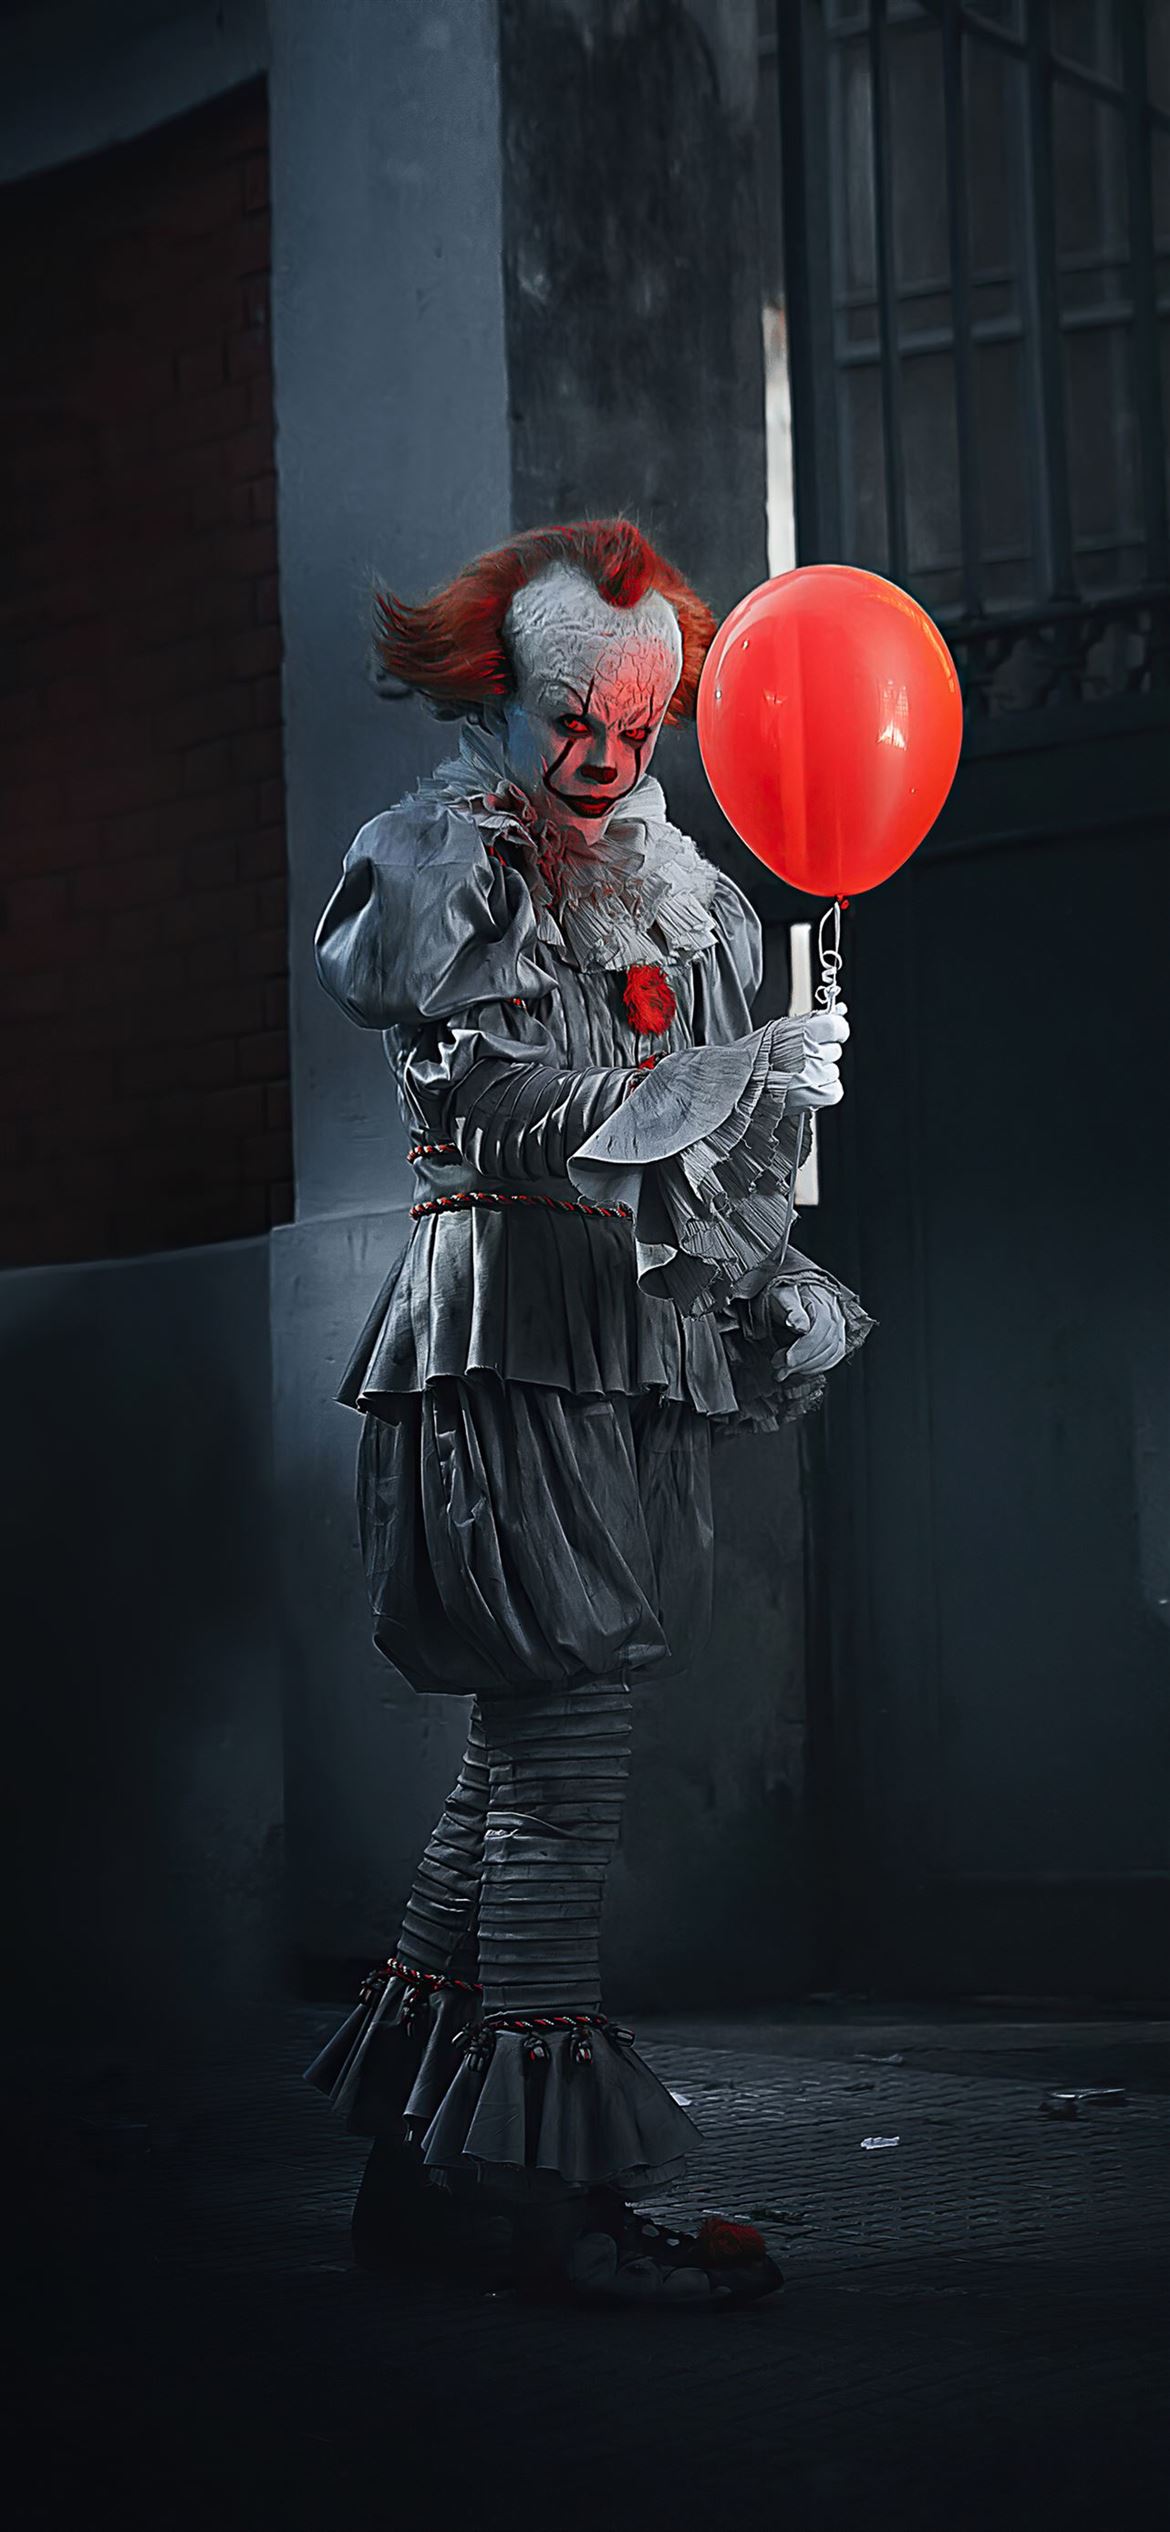 pennywise ballons iPhone X Wallpapers Free Download